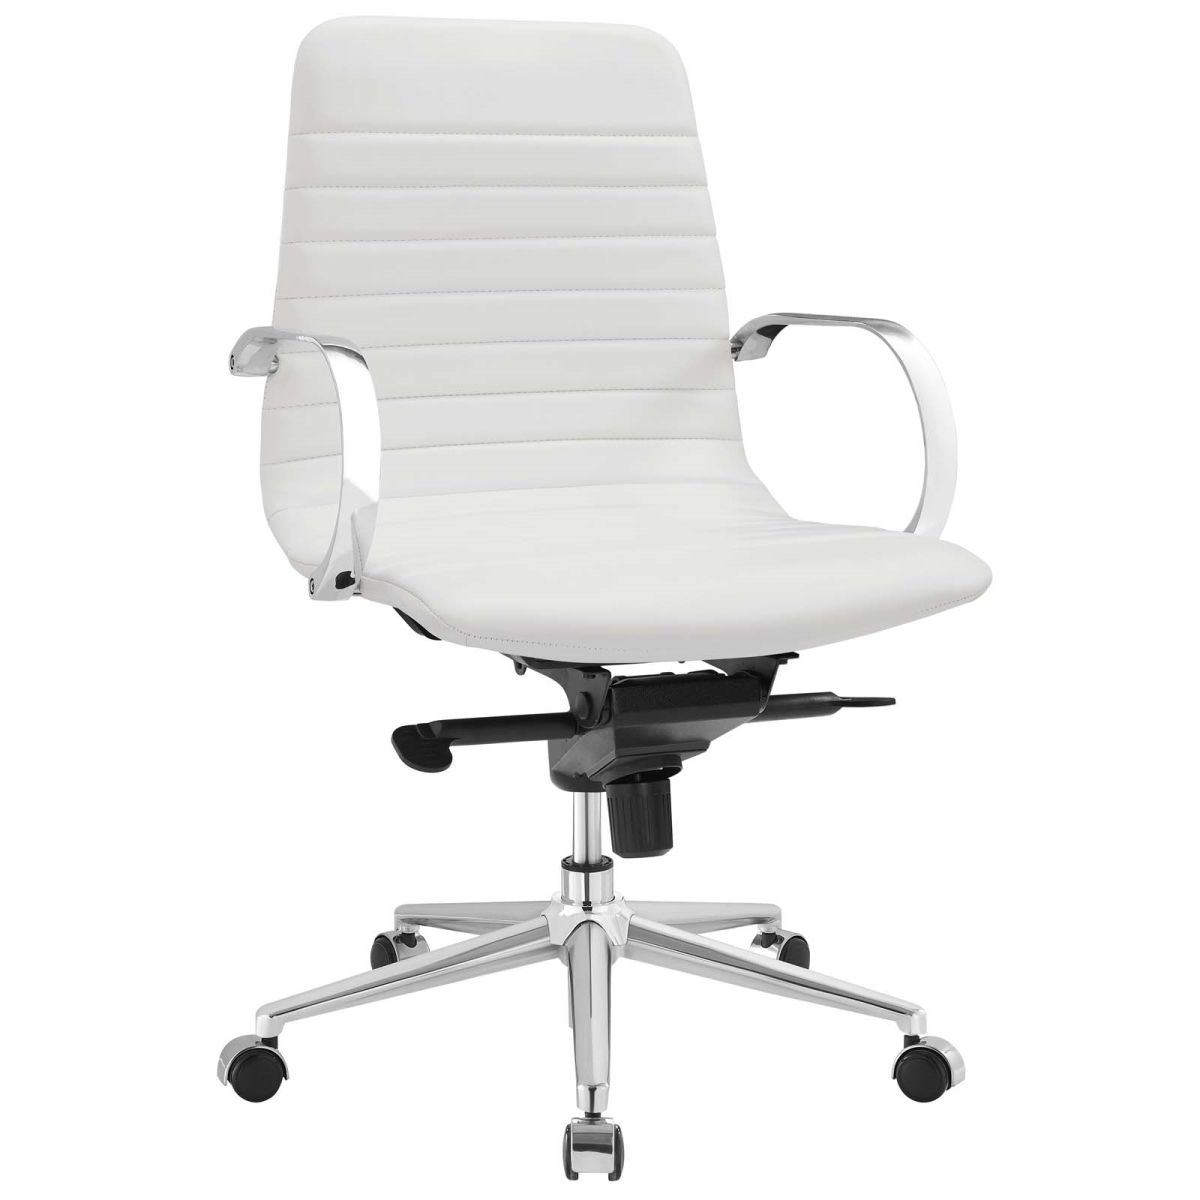 Eei-2859-whi Groove Ribbed Back Office Chair - White, 37 - 39 X 23 X 24 In.